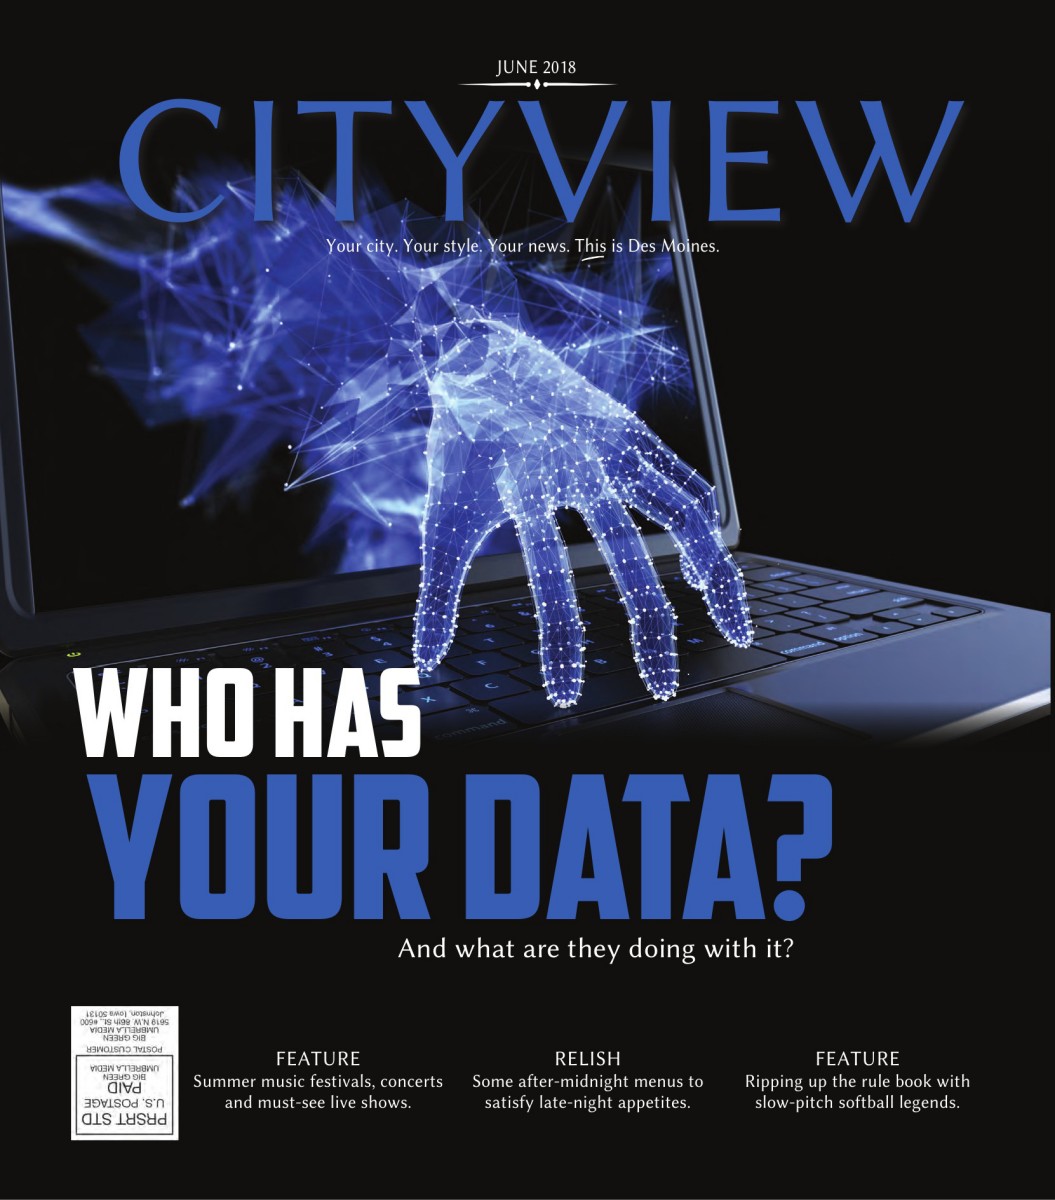 http://www.dmcityview.com/CityviewJune2018/files/pages/tablet/1.jpg